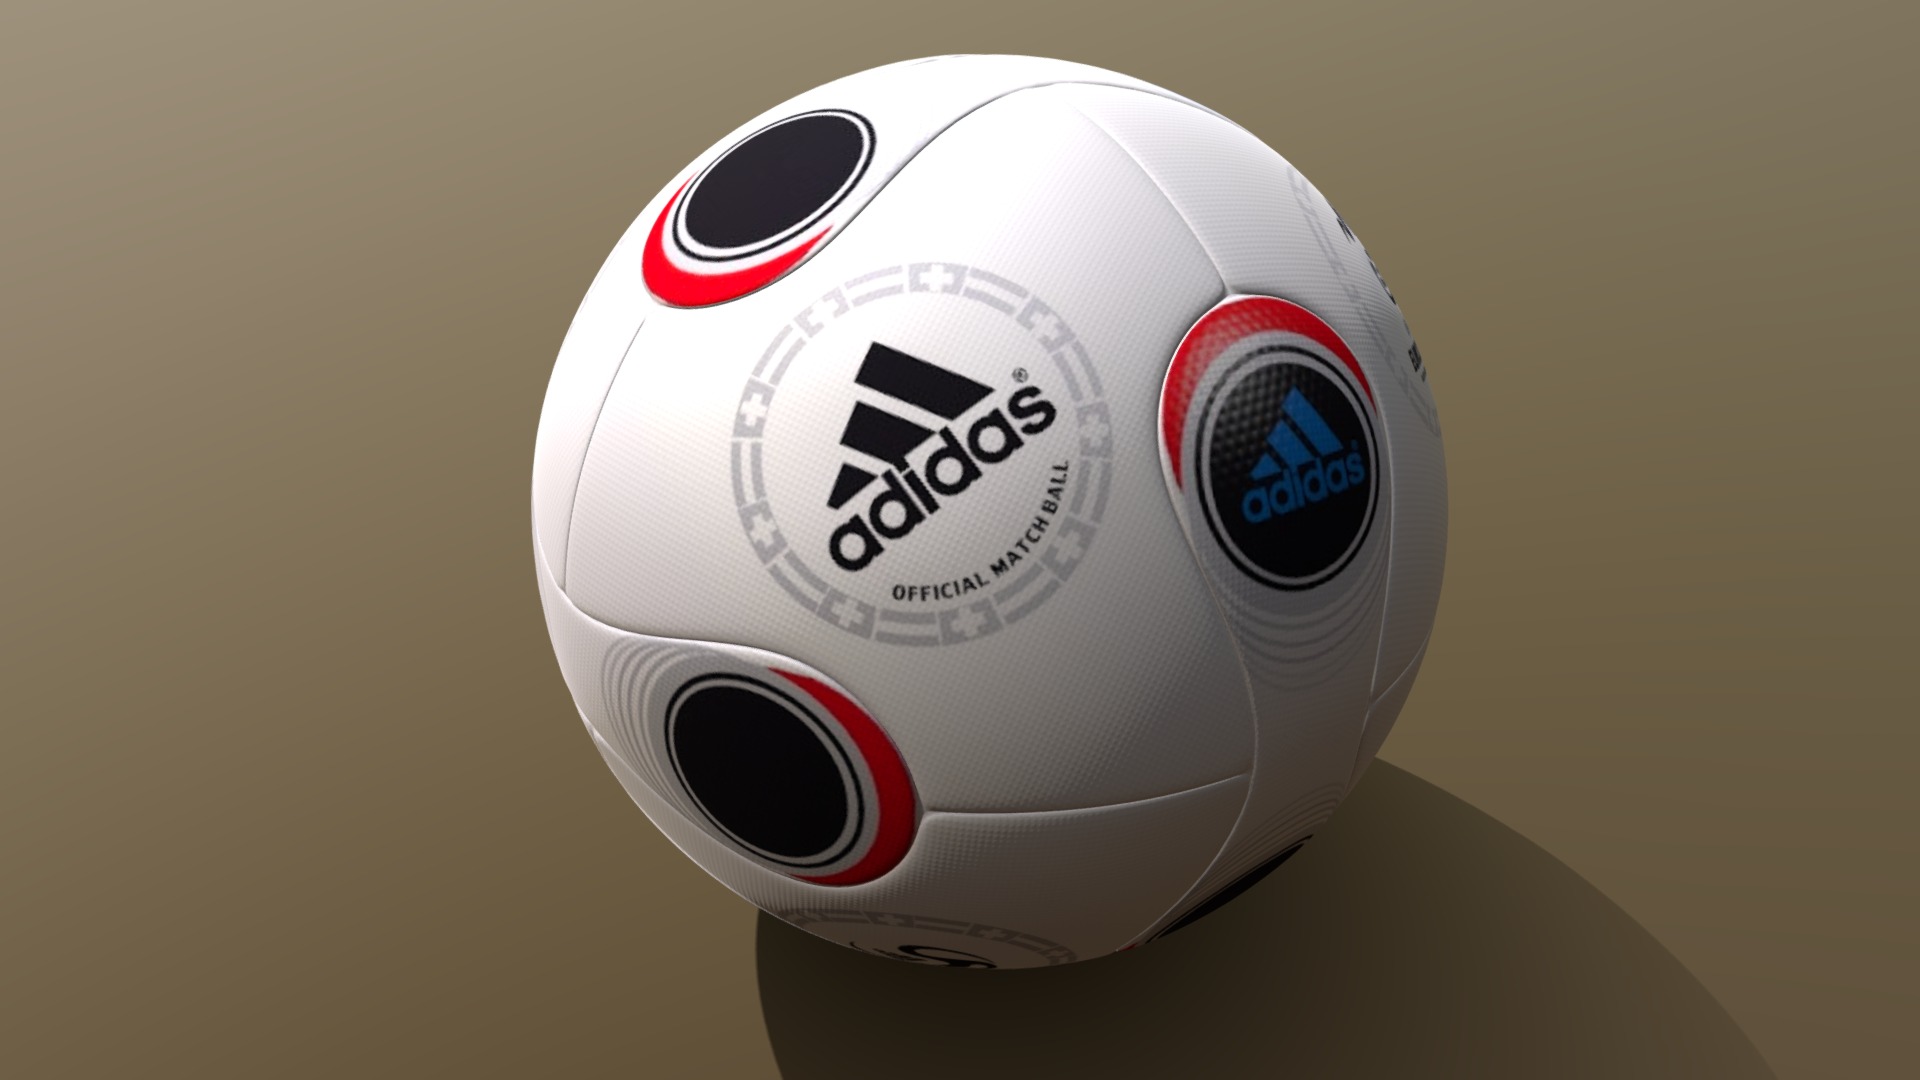 3D model Soccer Ball Adidas Europass - This is a 3D model of the Soccer Ball Adidas Europass. The 3D model is about a white and black football ball.